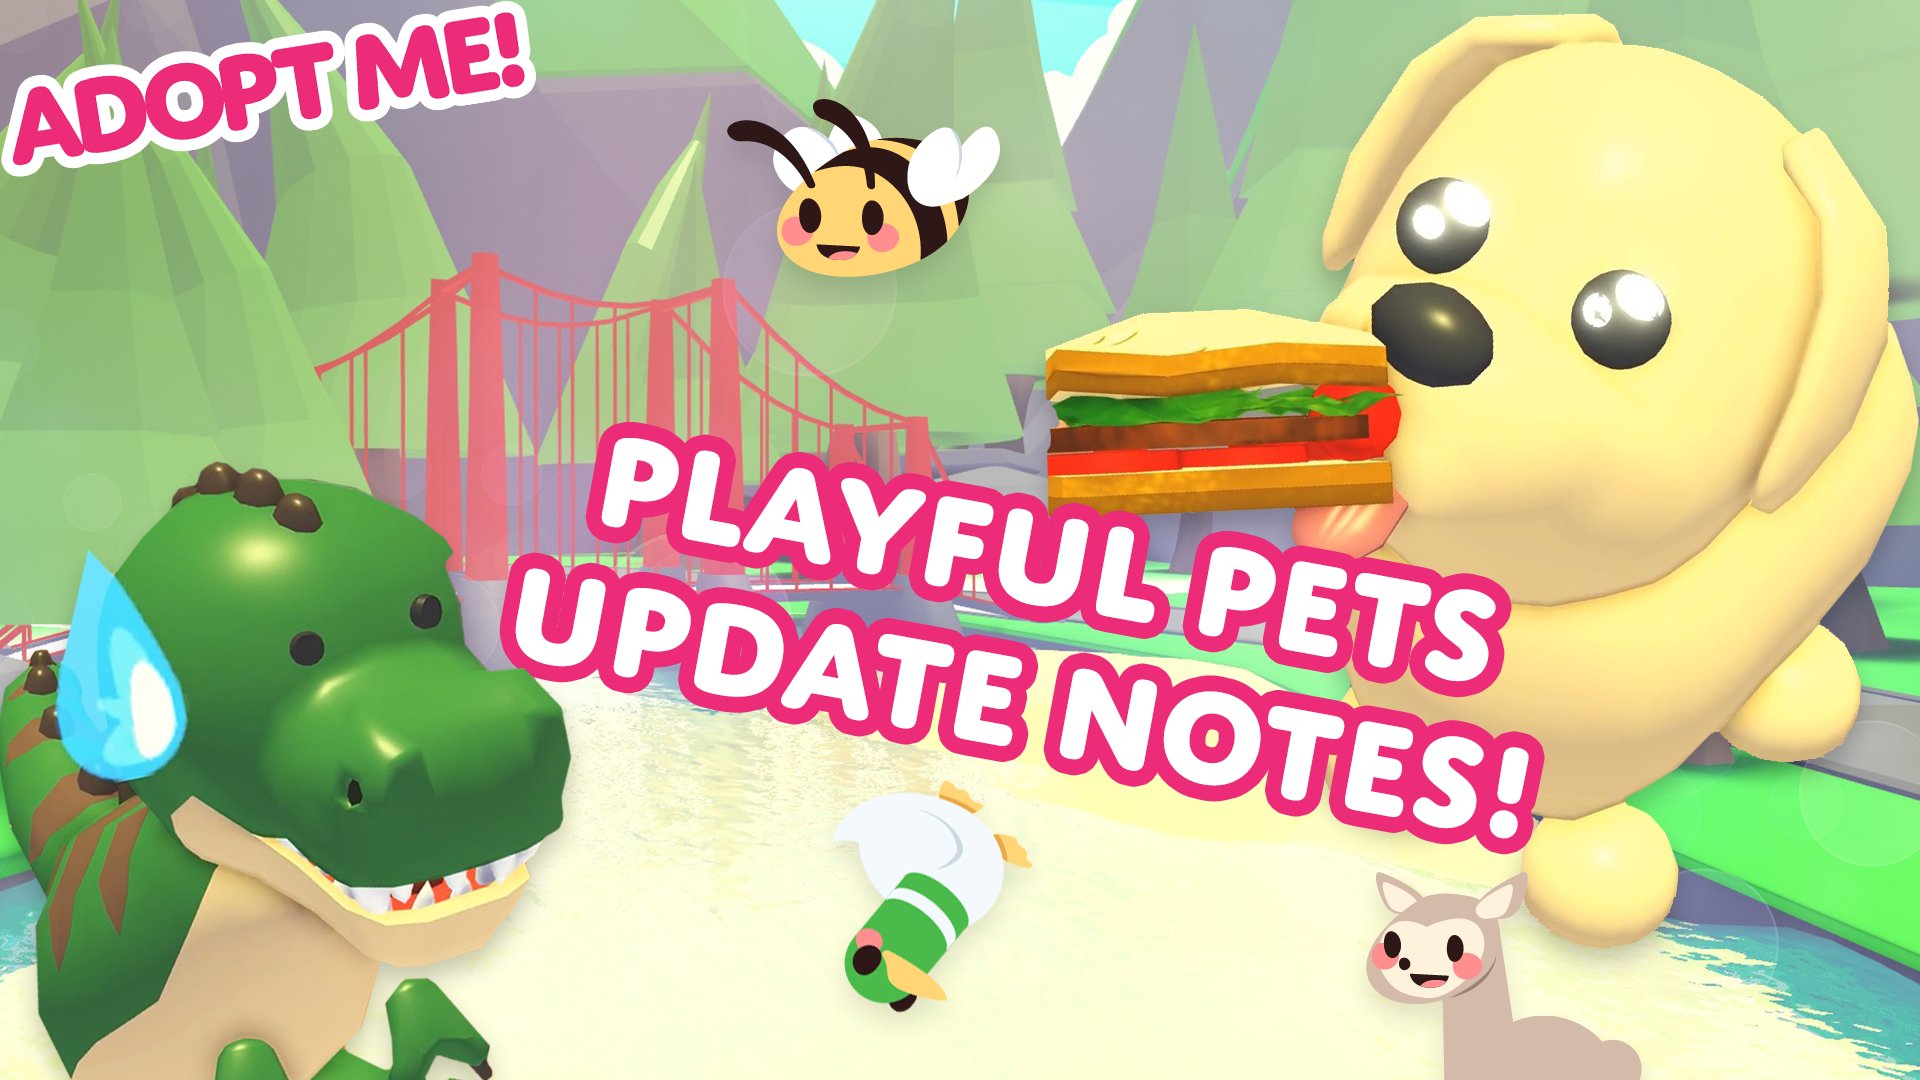 Adopt Me! on X: 😻 Playful Pets update! 🥺💕 🙀 More expressive